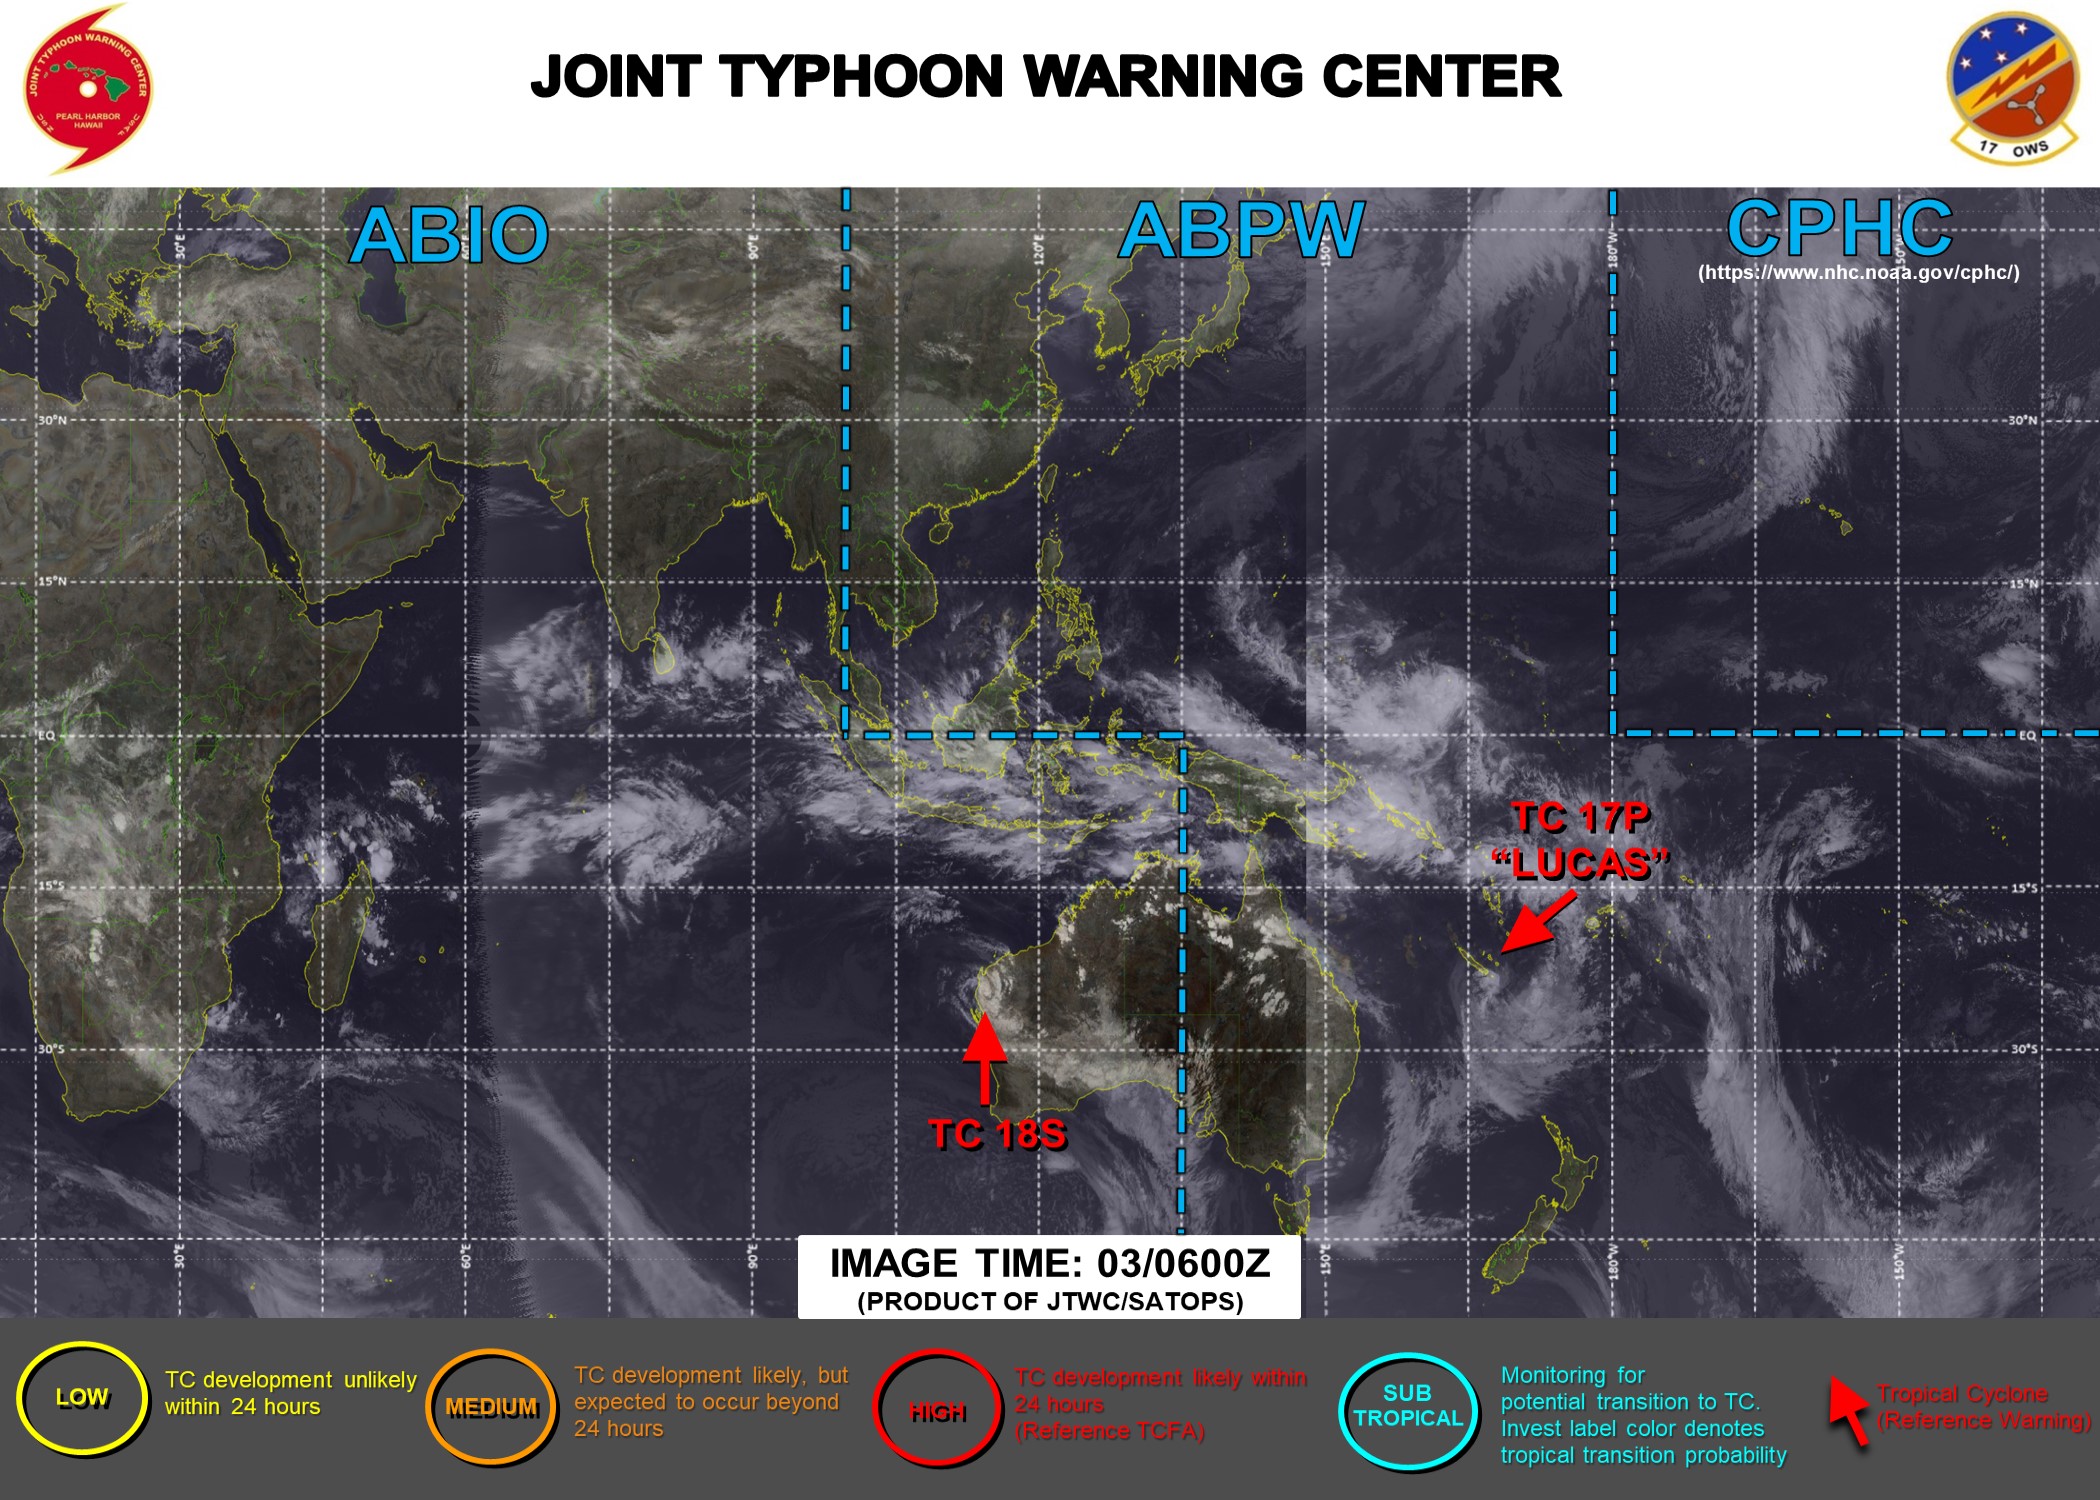 03/06UTC. JTWC IS ISSUING 6HOURLY WARNINGS ON 18S. WARNING 13/FINAL WAS ISSUED AT 03/03UTC ON 17P(LUCAS). 3 HOURLY SATELLITE BULLETINS ARE PROVIDED FOR 18S AND 17P WHEREAS THEY WERE DISCONTINUED FOR 15P(ANA) AT 02/18UTC.